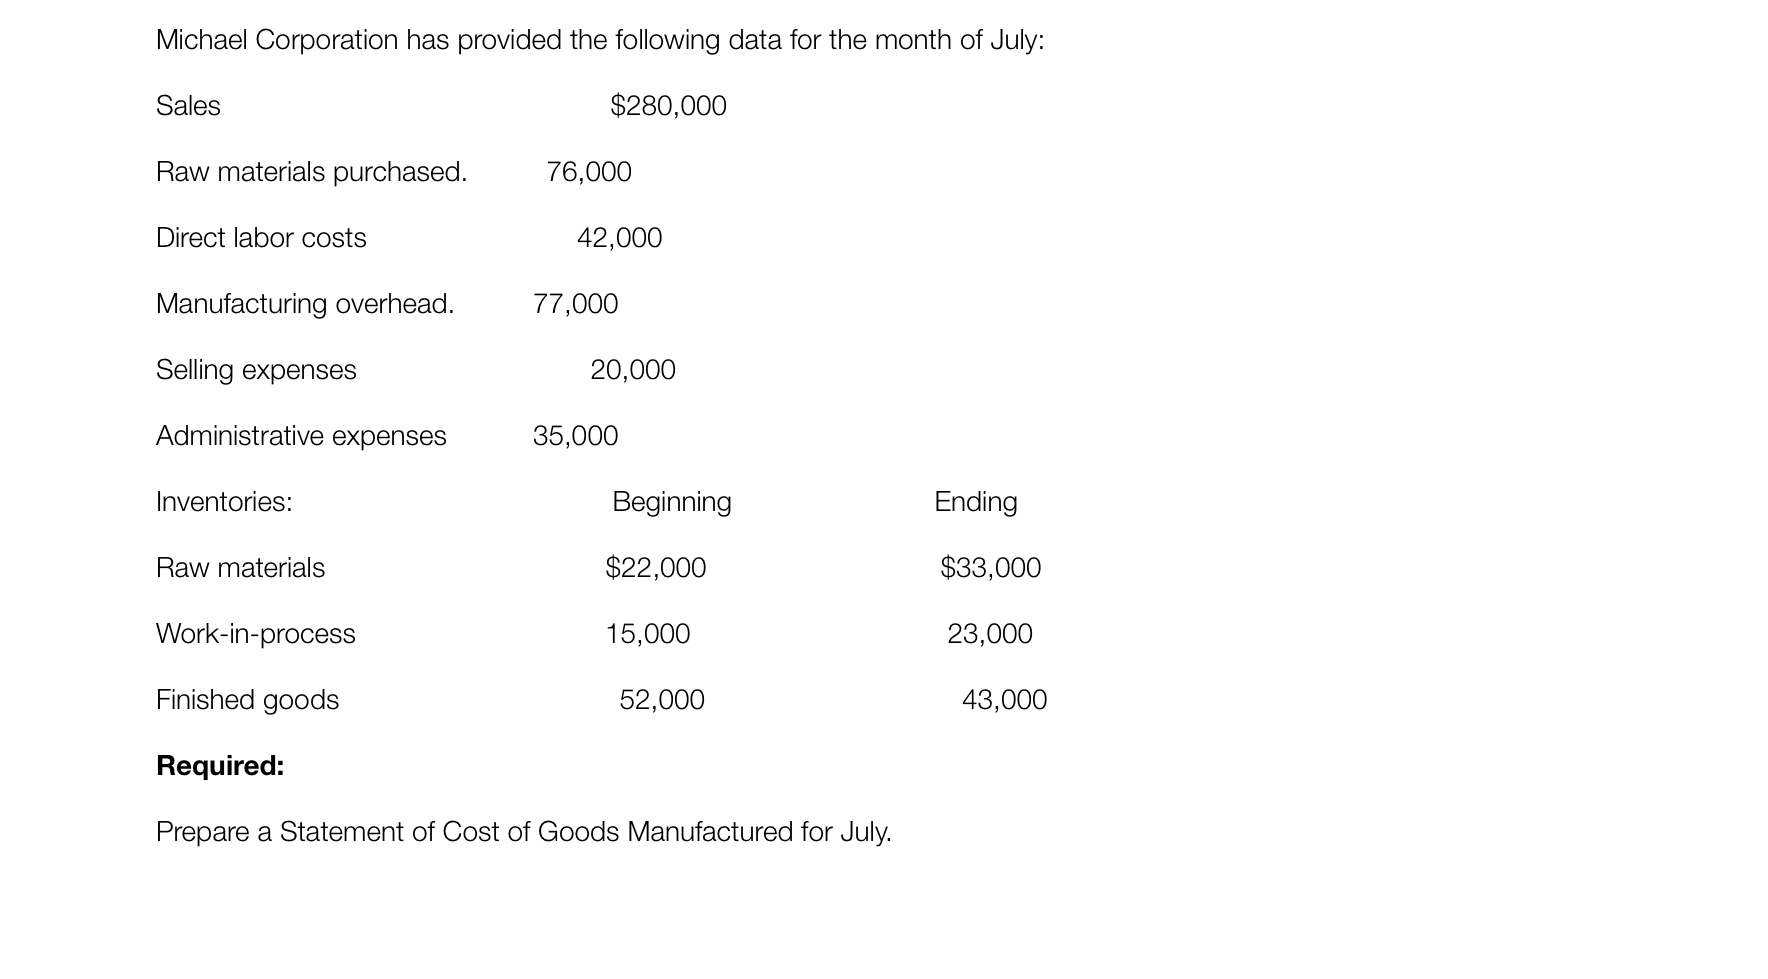 Prepare a Statement of Cost of Goods Manufactured for July.
